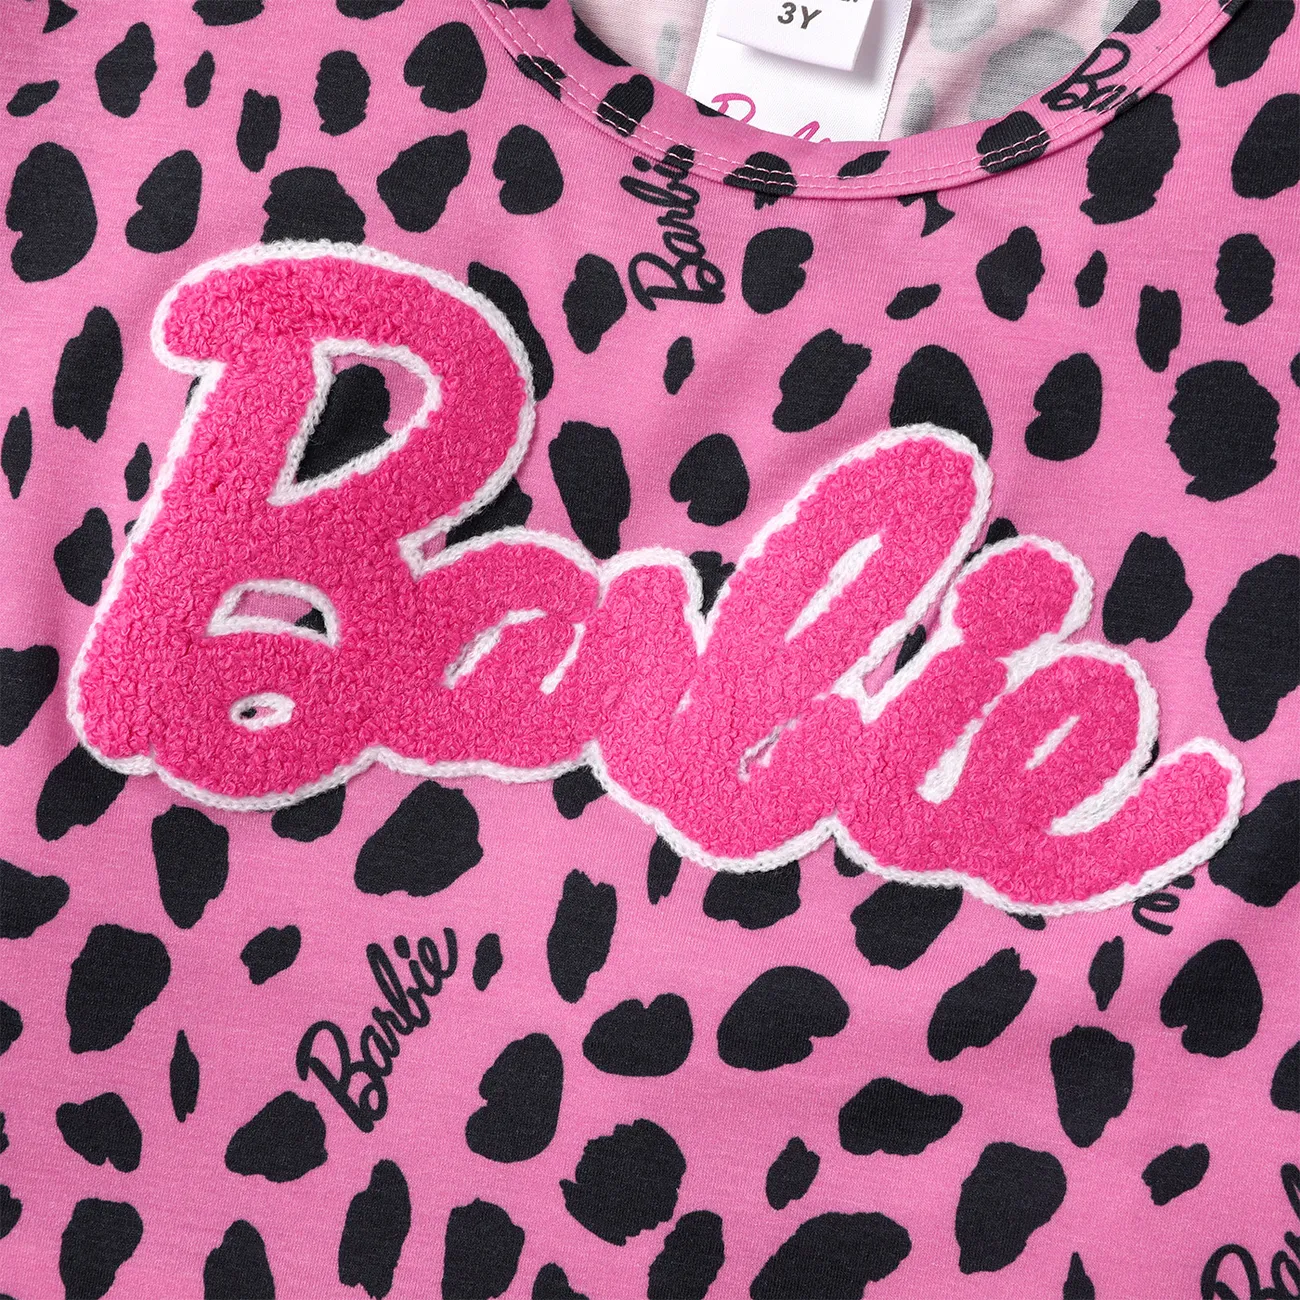 Barbie Toddler/Kid Girl Leopard/Colorblock Print Naia™ Short-sleeve Dress with Fanny Pack Pink big image 1